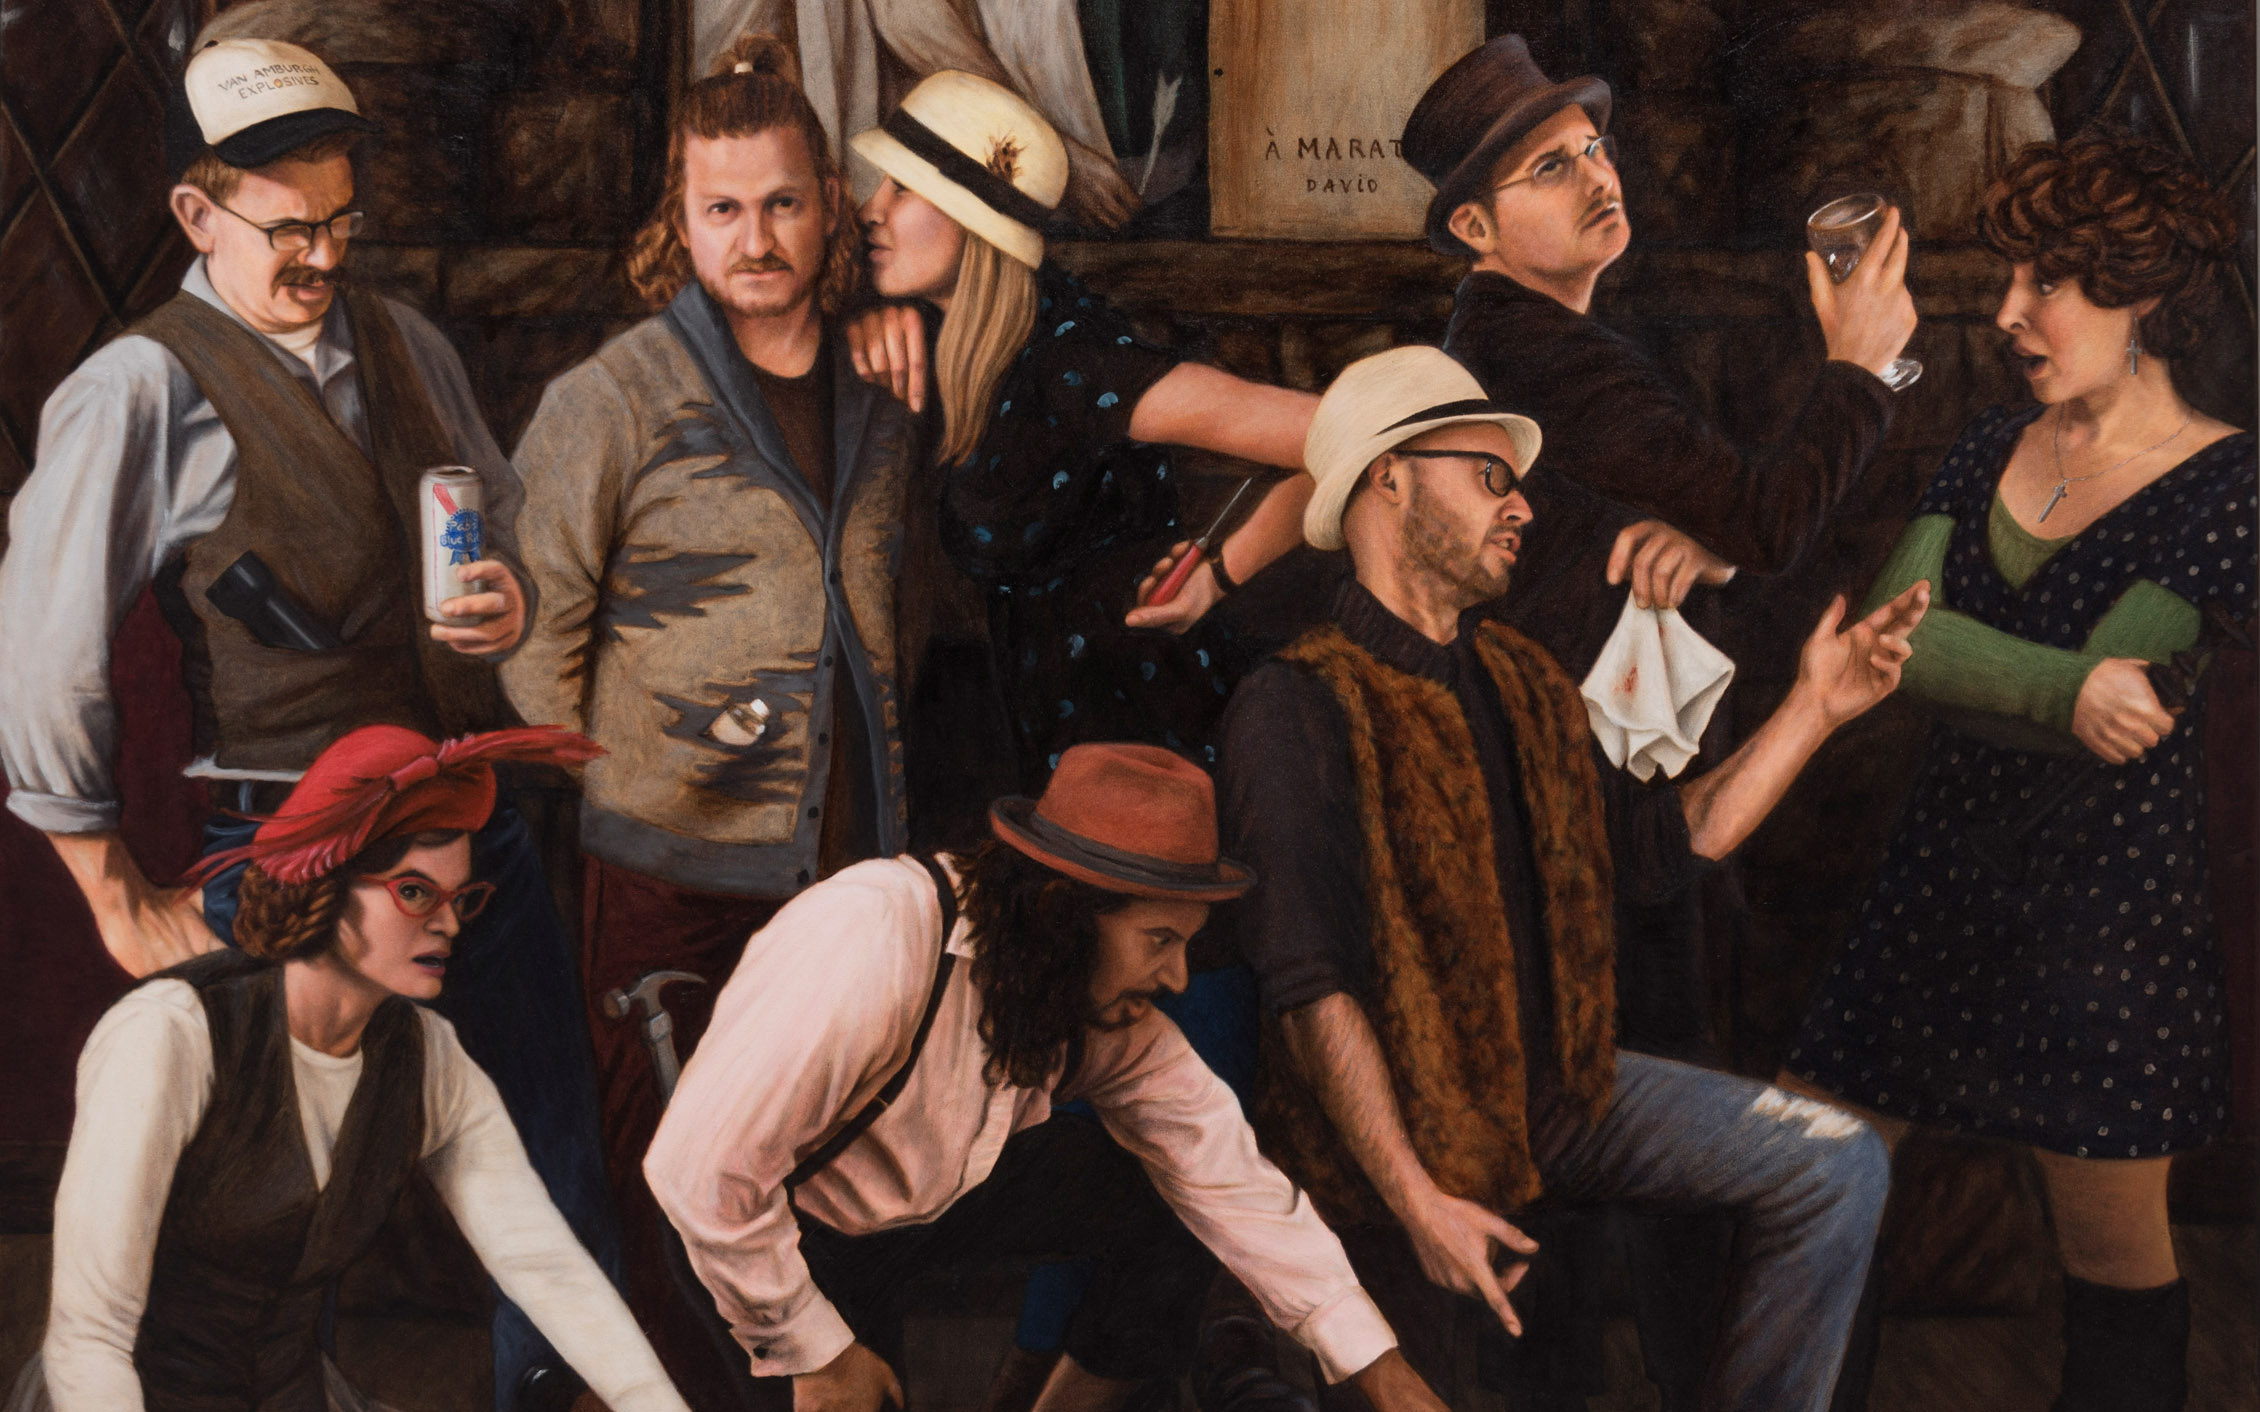 Image: Eight individuals, both males and females, at a bar in various poses and drinking.